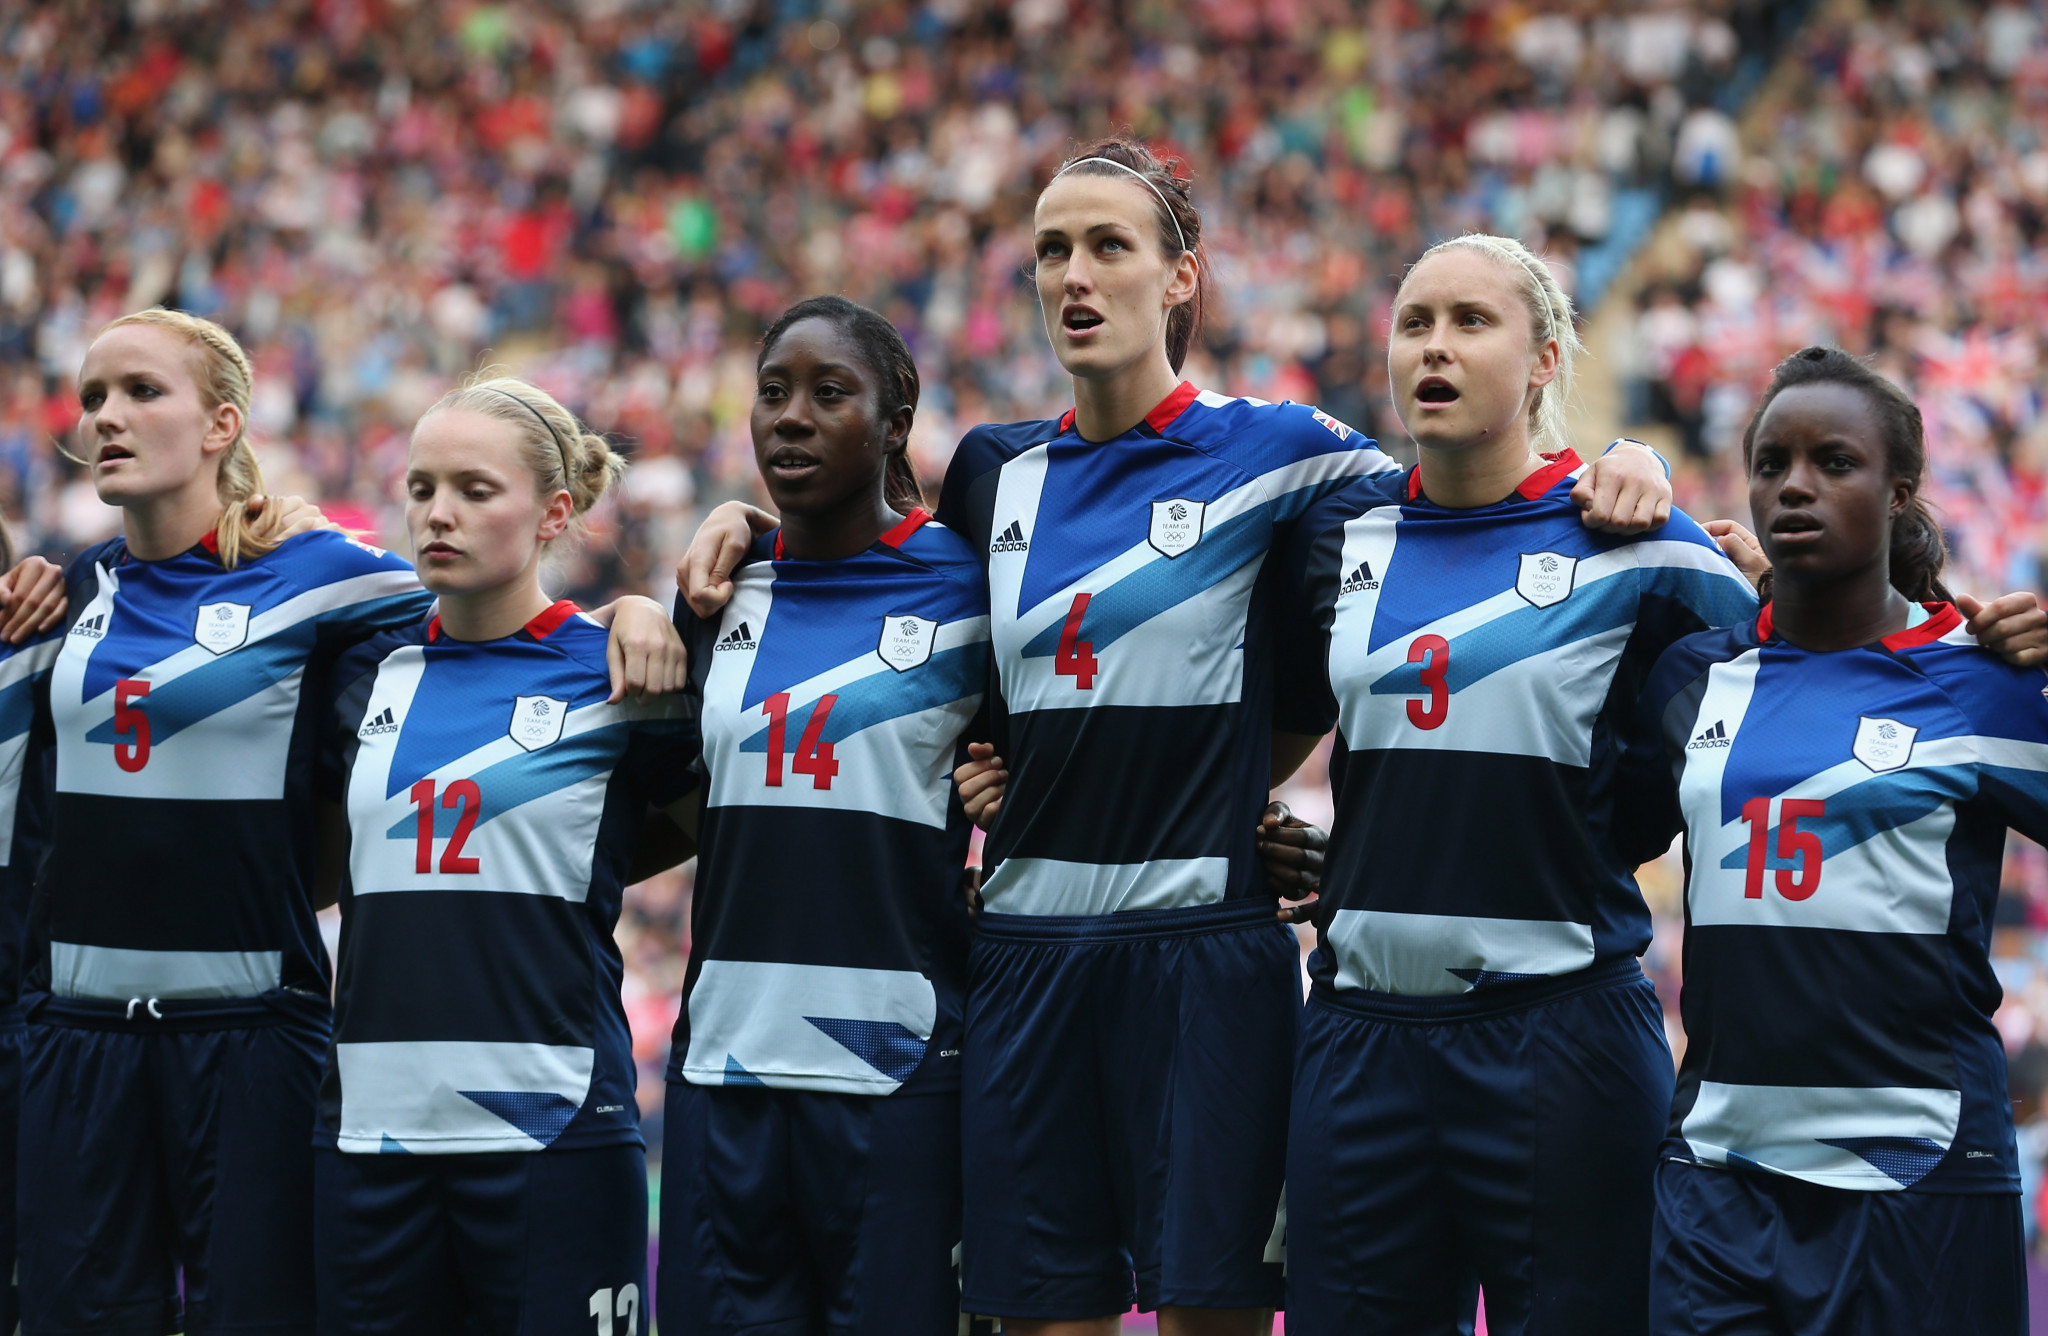 A British women's side competed at London 2012 ©Getty Images